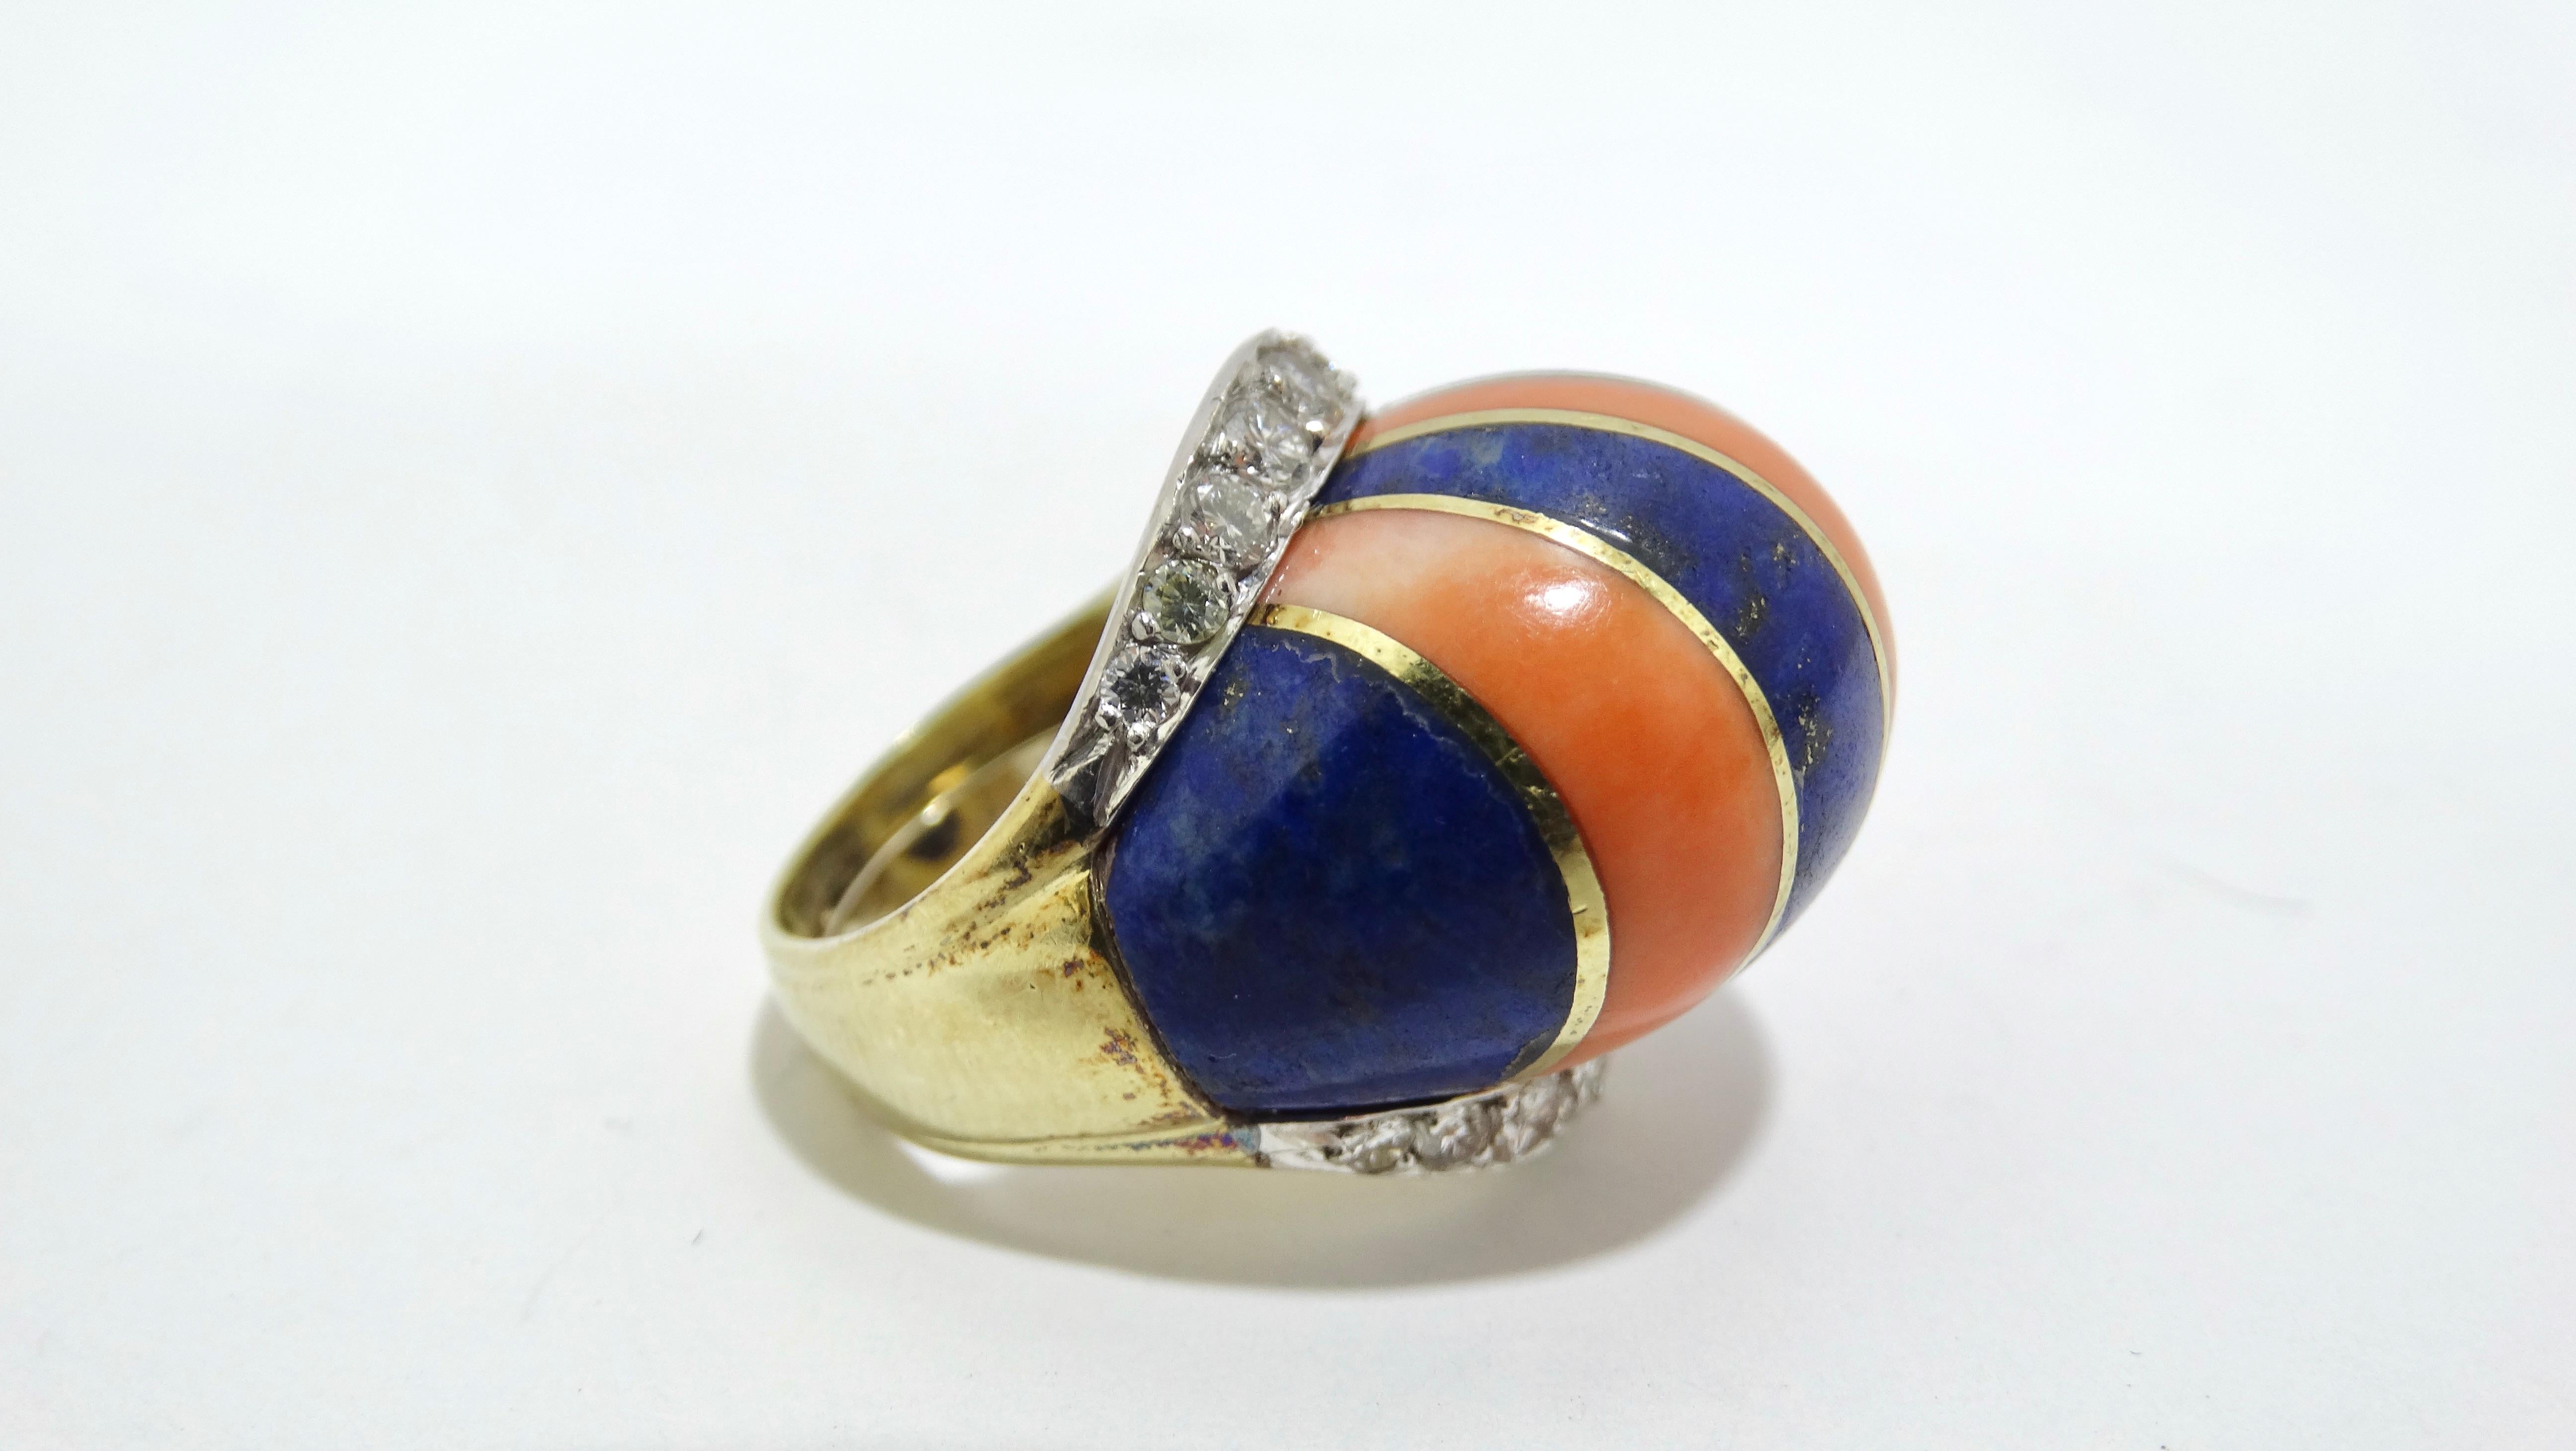 Add a little fun to your ring collection with this unique David Webb style ring. This is a Coral and Blue Lapis striped cocktail ring with two layers of 18 beautiful diamonds featured in 14k gold. It features a clamp on the interior to fit a range